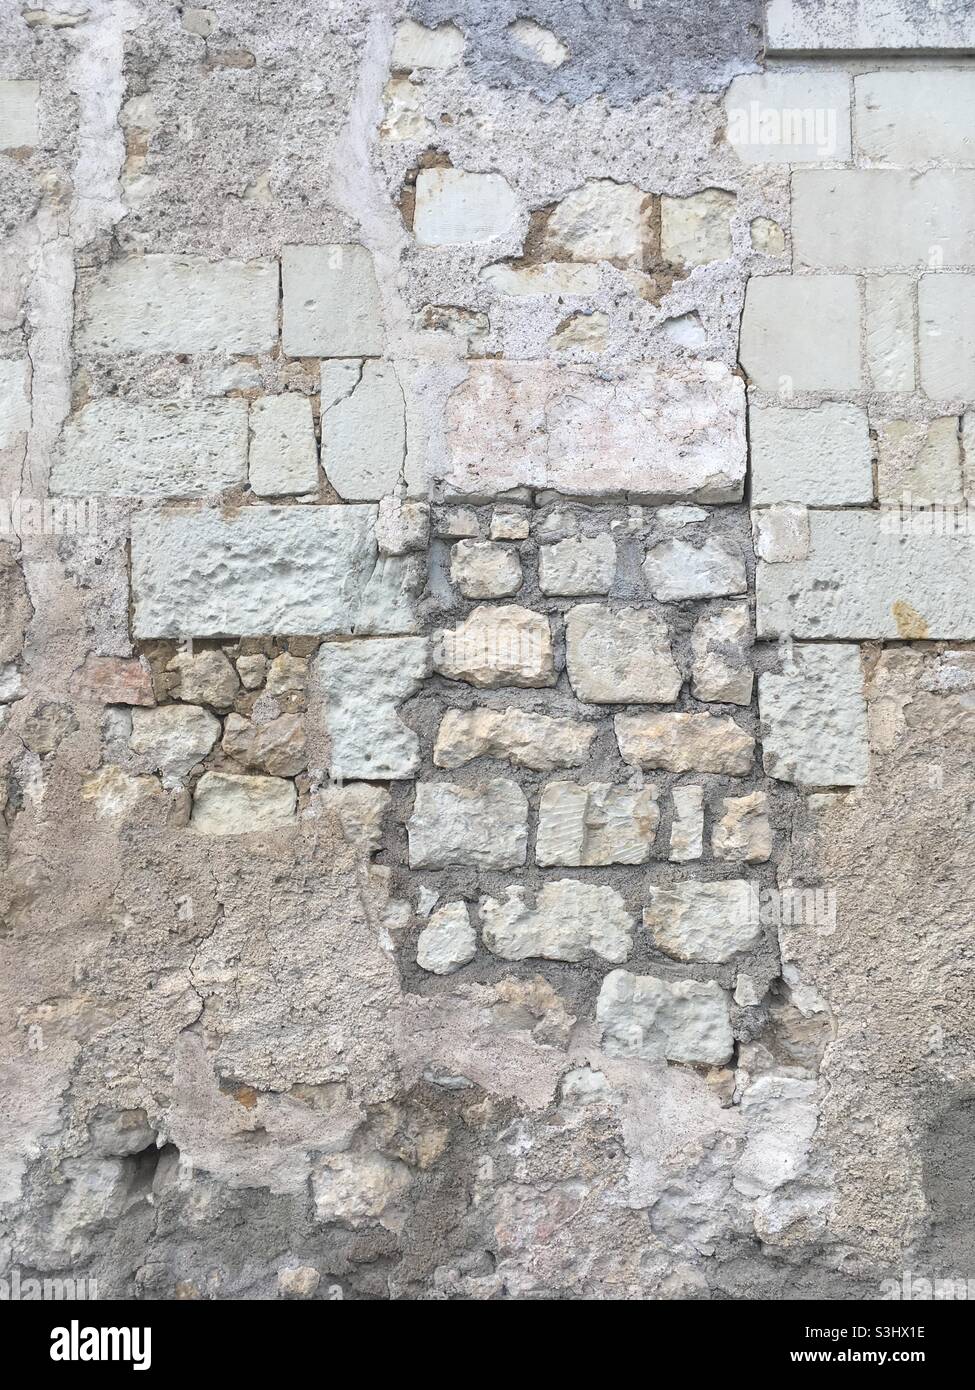 Rustic medieval French wall Stock Photo